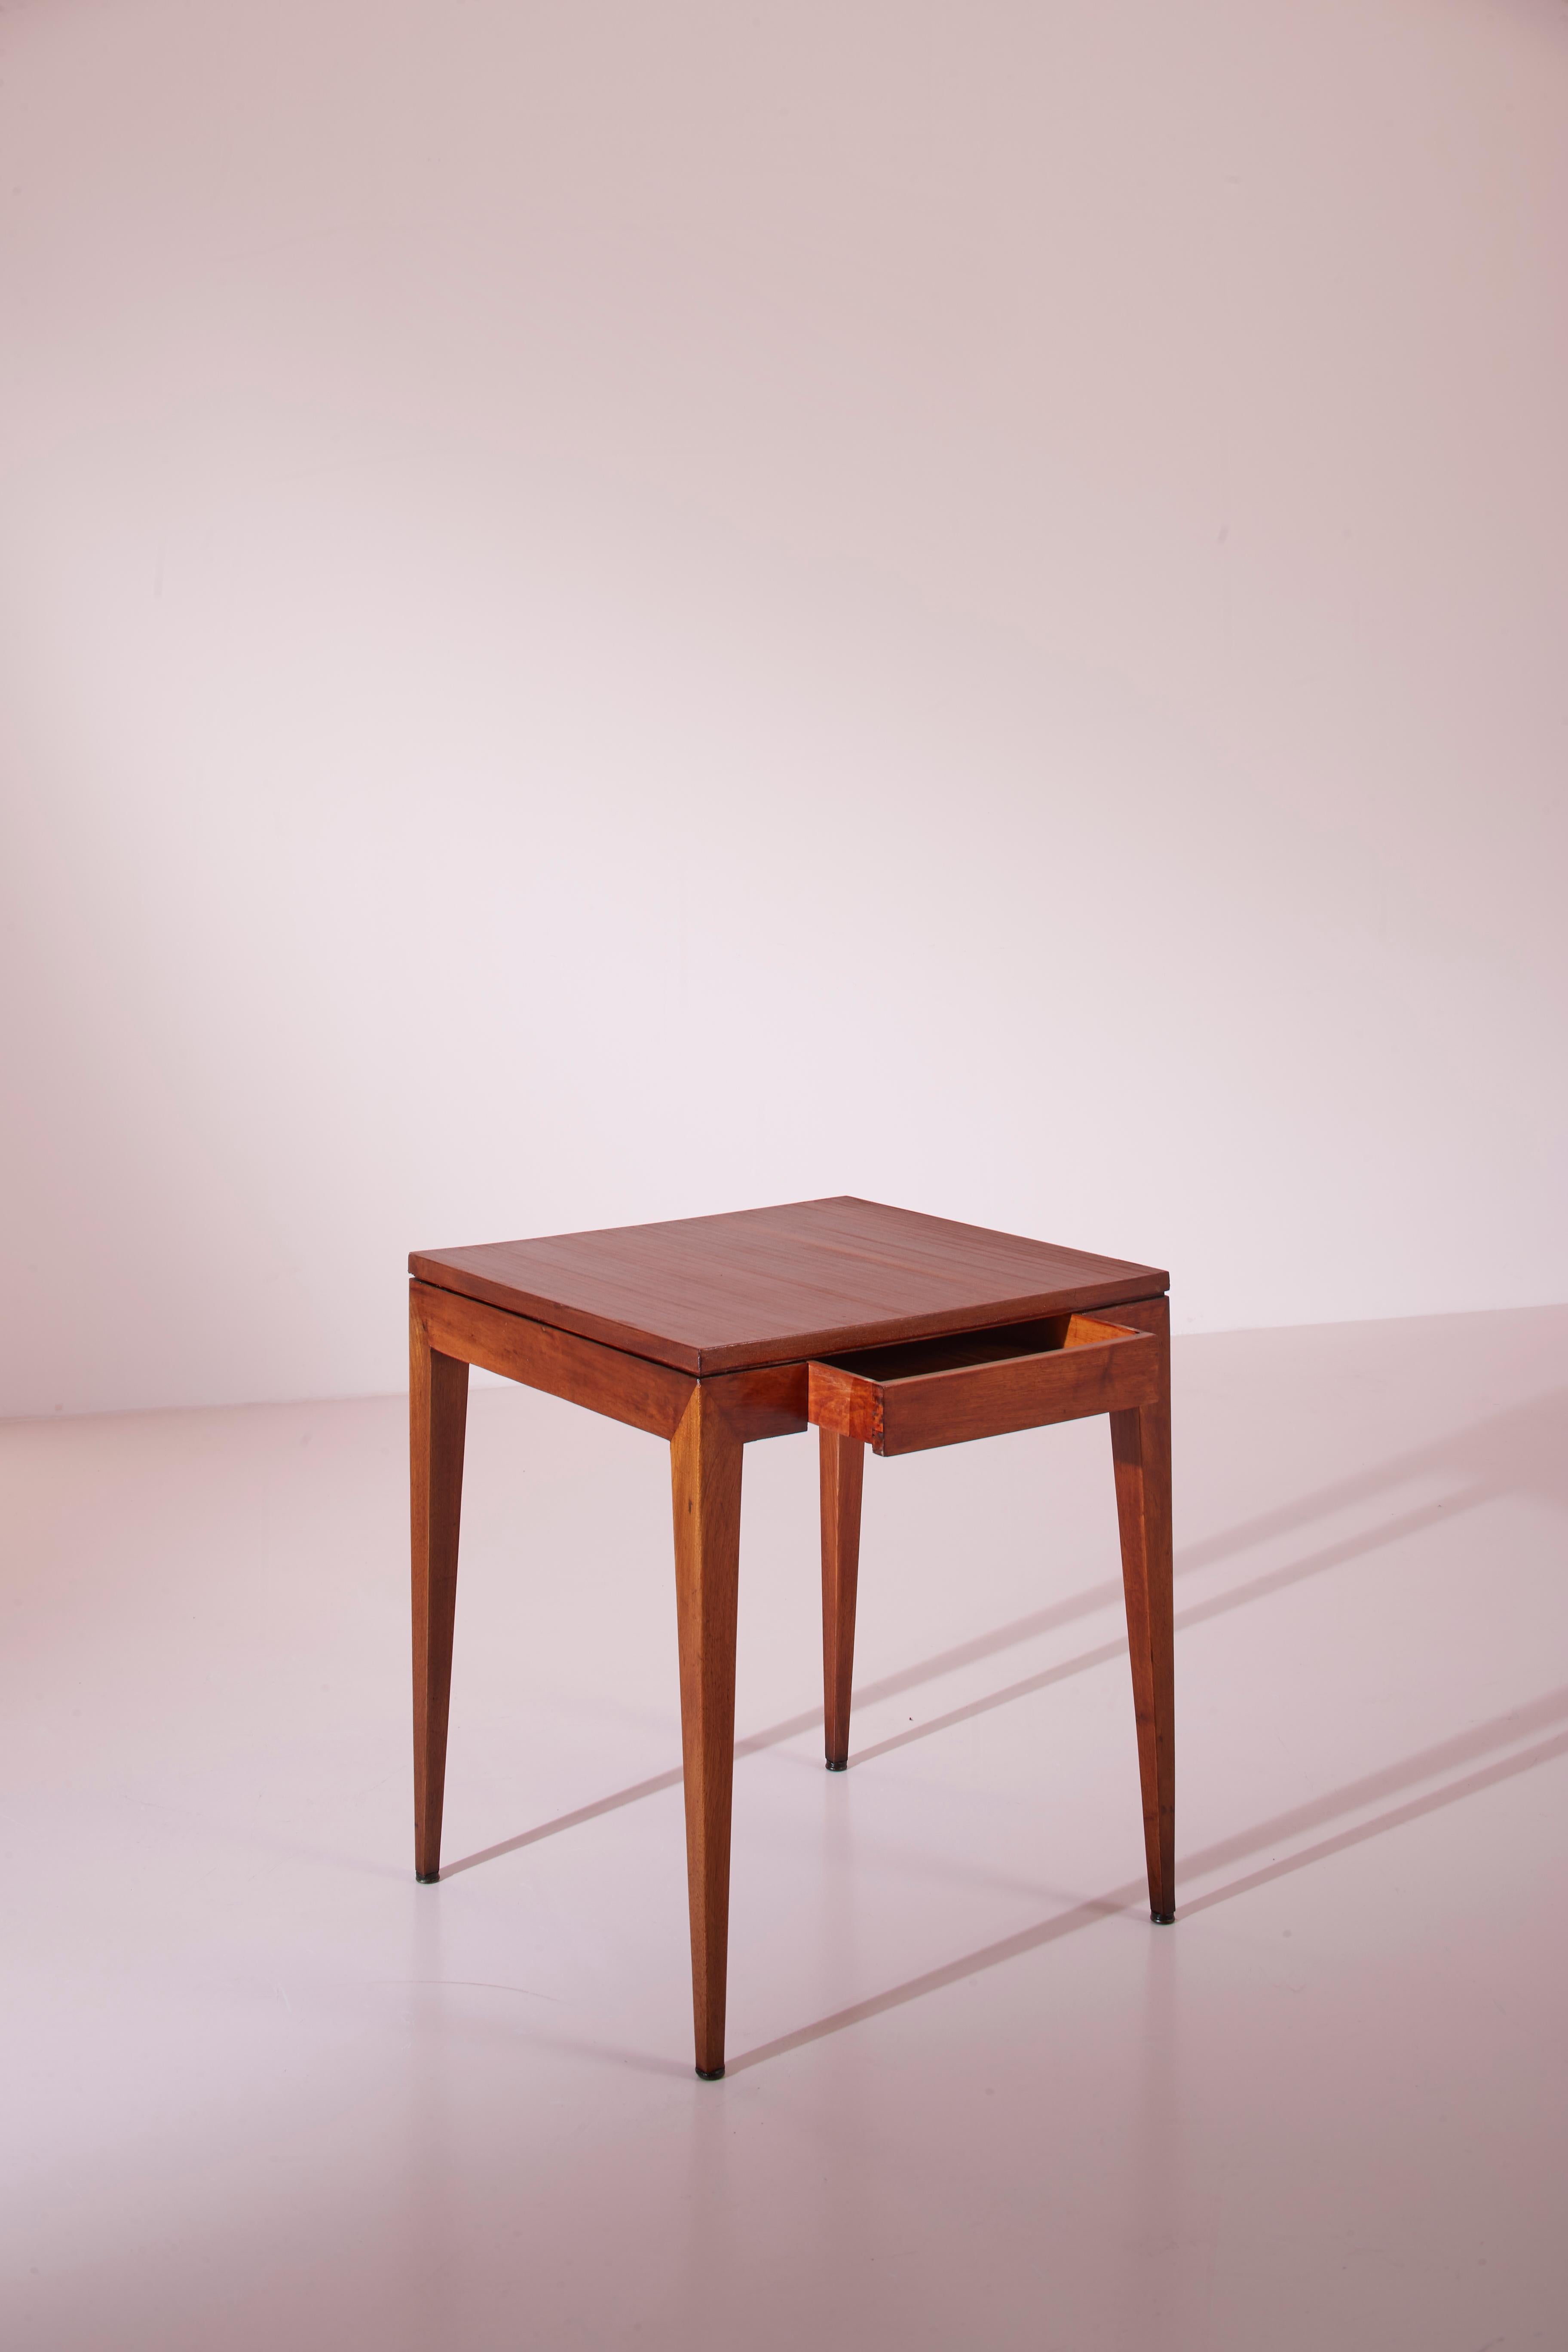 Mid-20th Century GIo Ponti walnut occasional table for the Cavalieri Hotel in Milan, Italy, 1950s For Sale